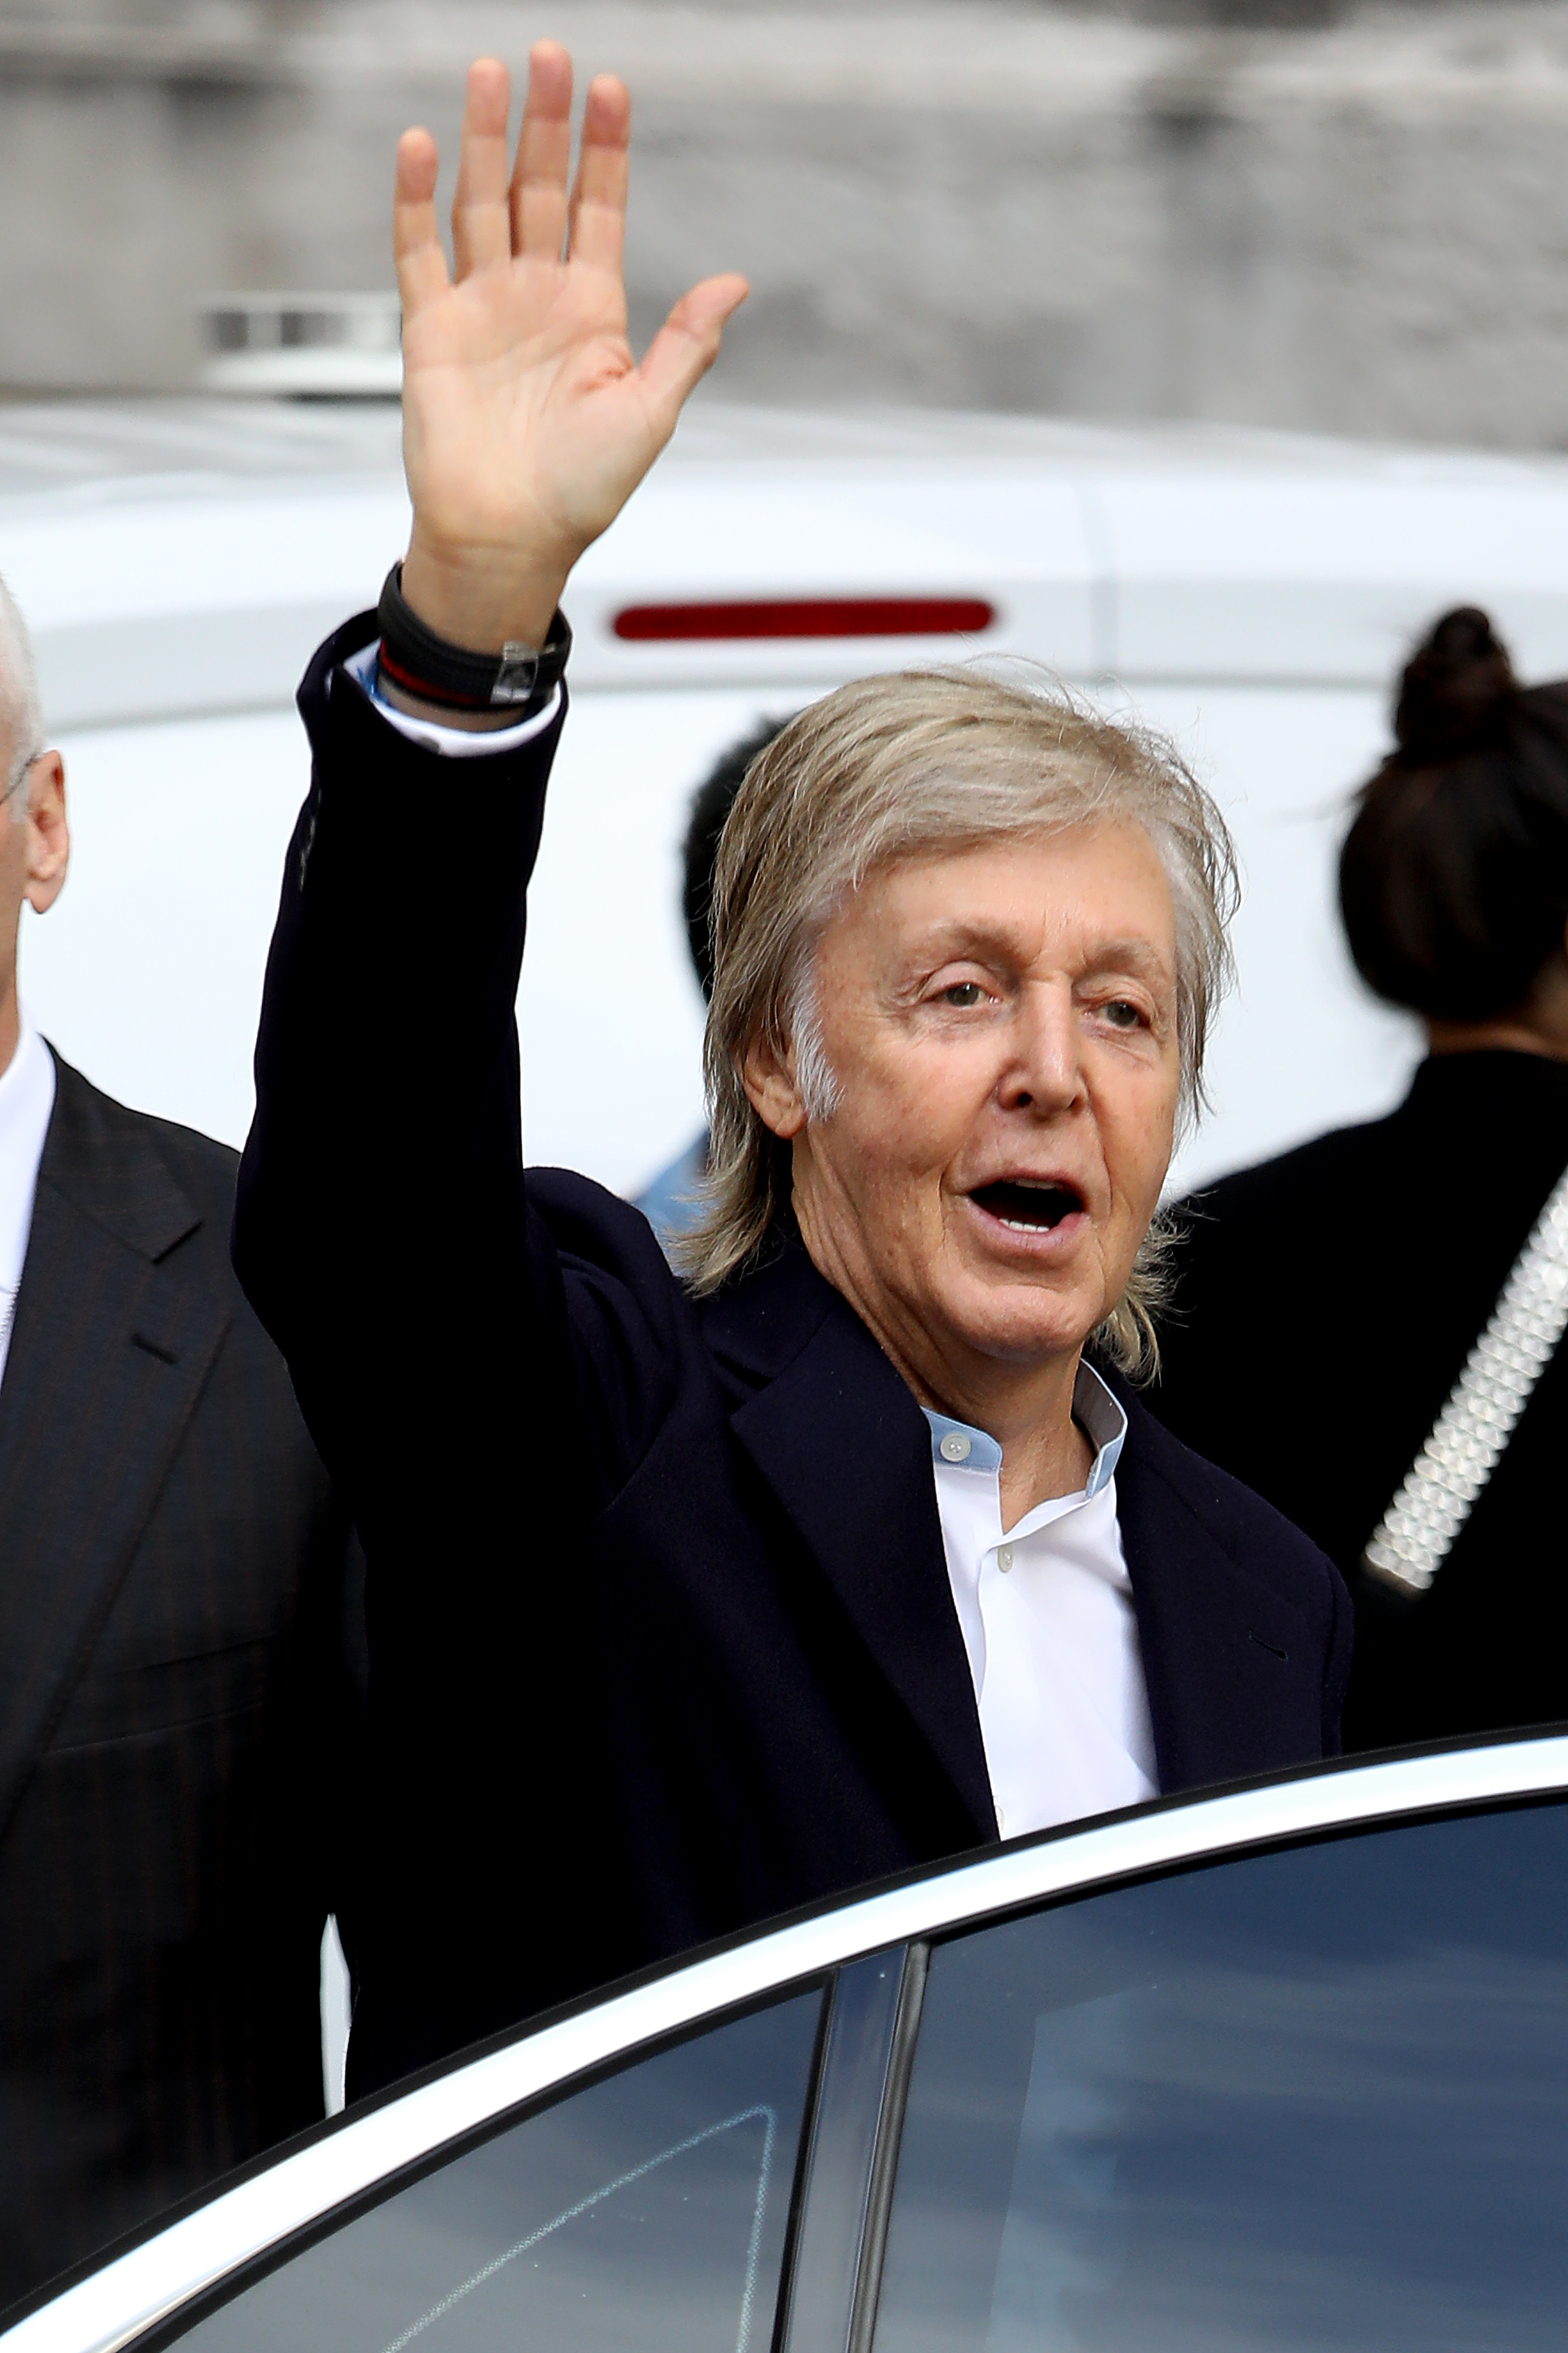 Paul McCartney attends the Stella McCartney Womenswear Spring/Summer 2020 show as part of Paris Fashion Week in Paris, France, on September 30, 2019. | Source: Getty Images